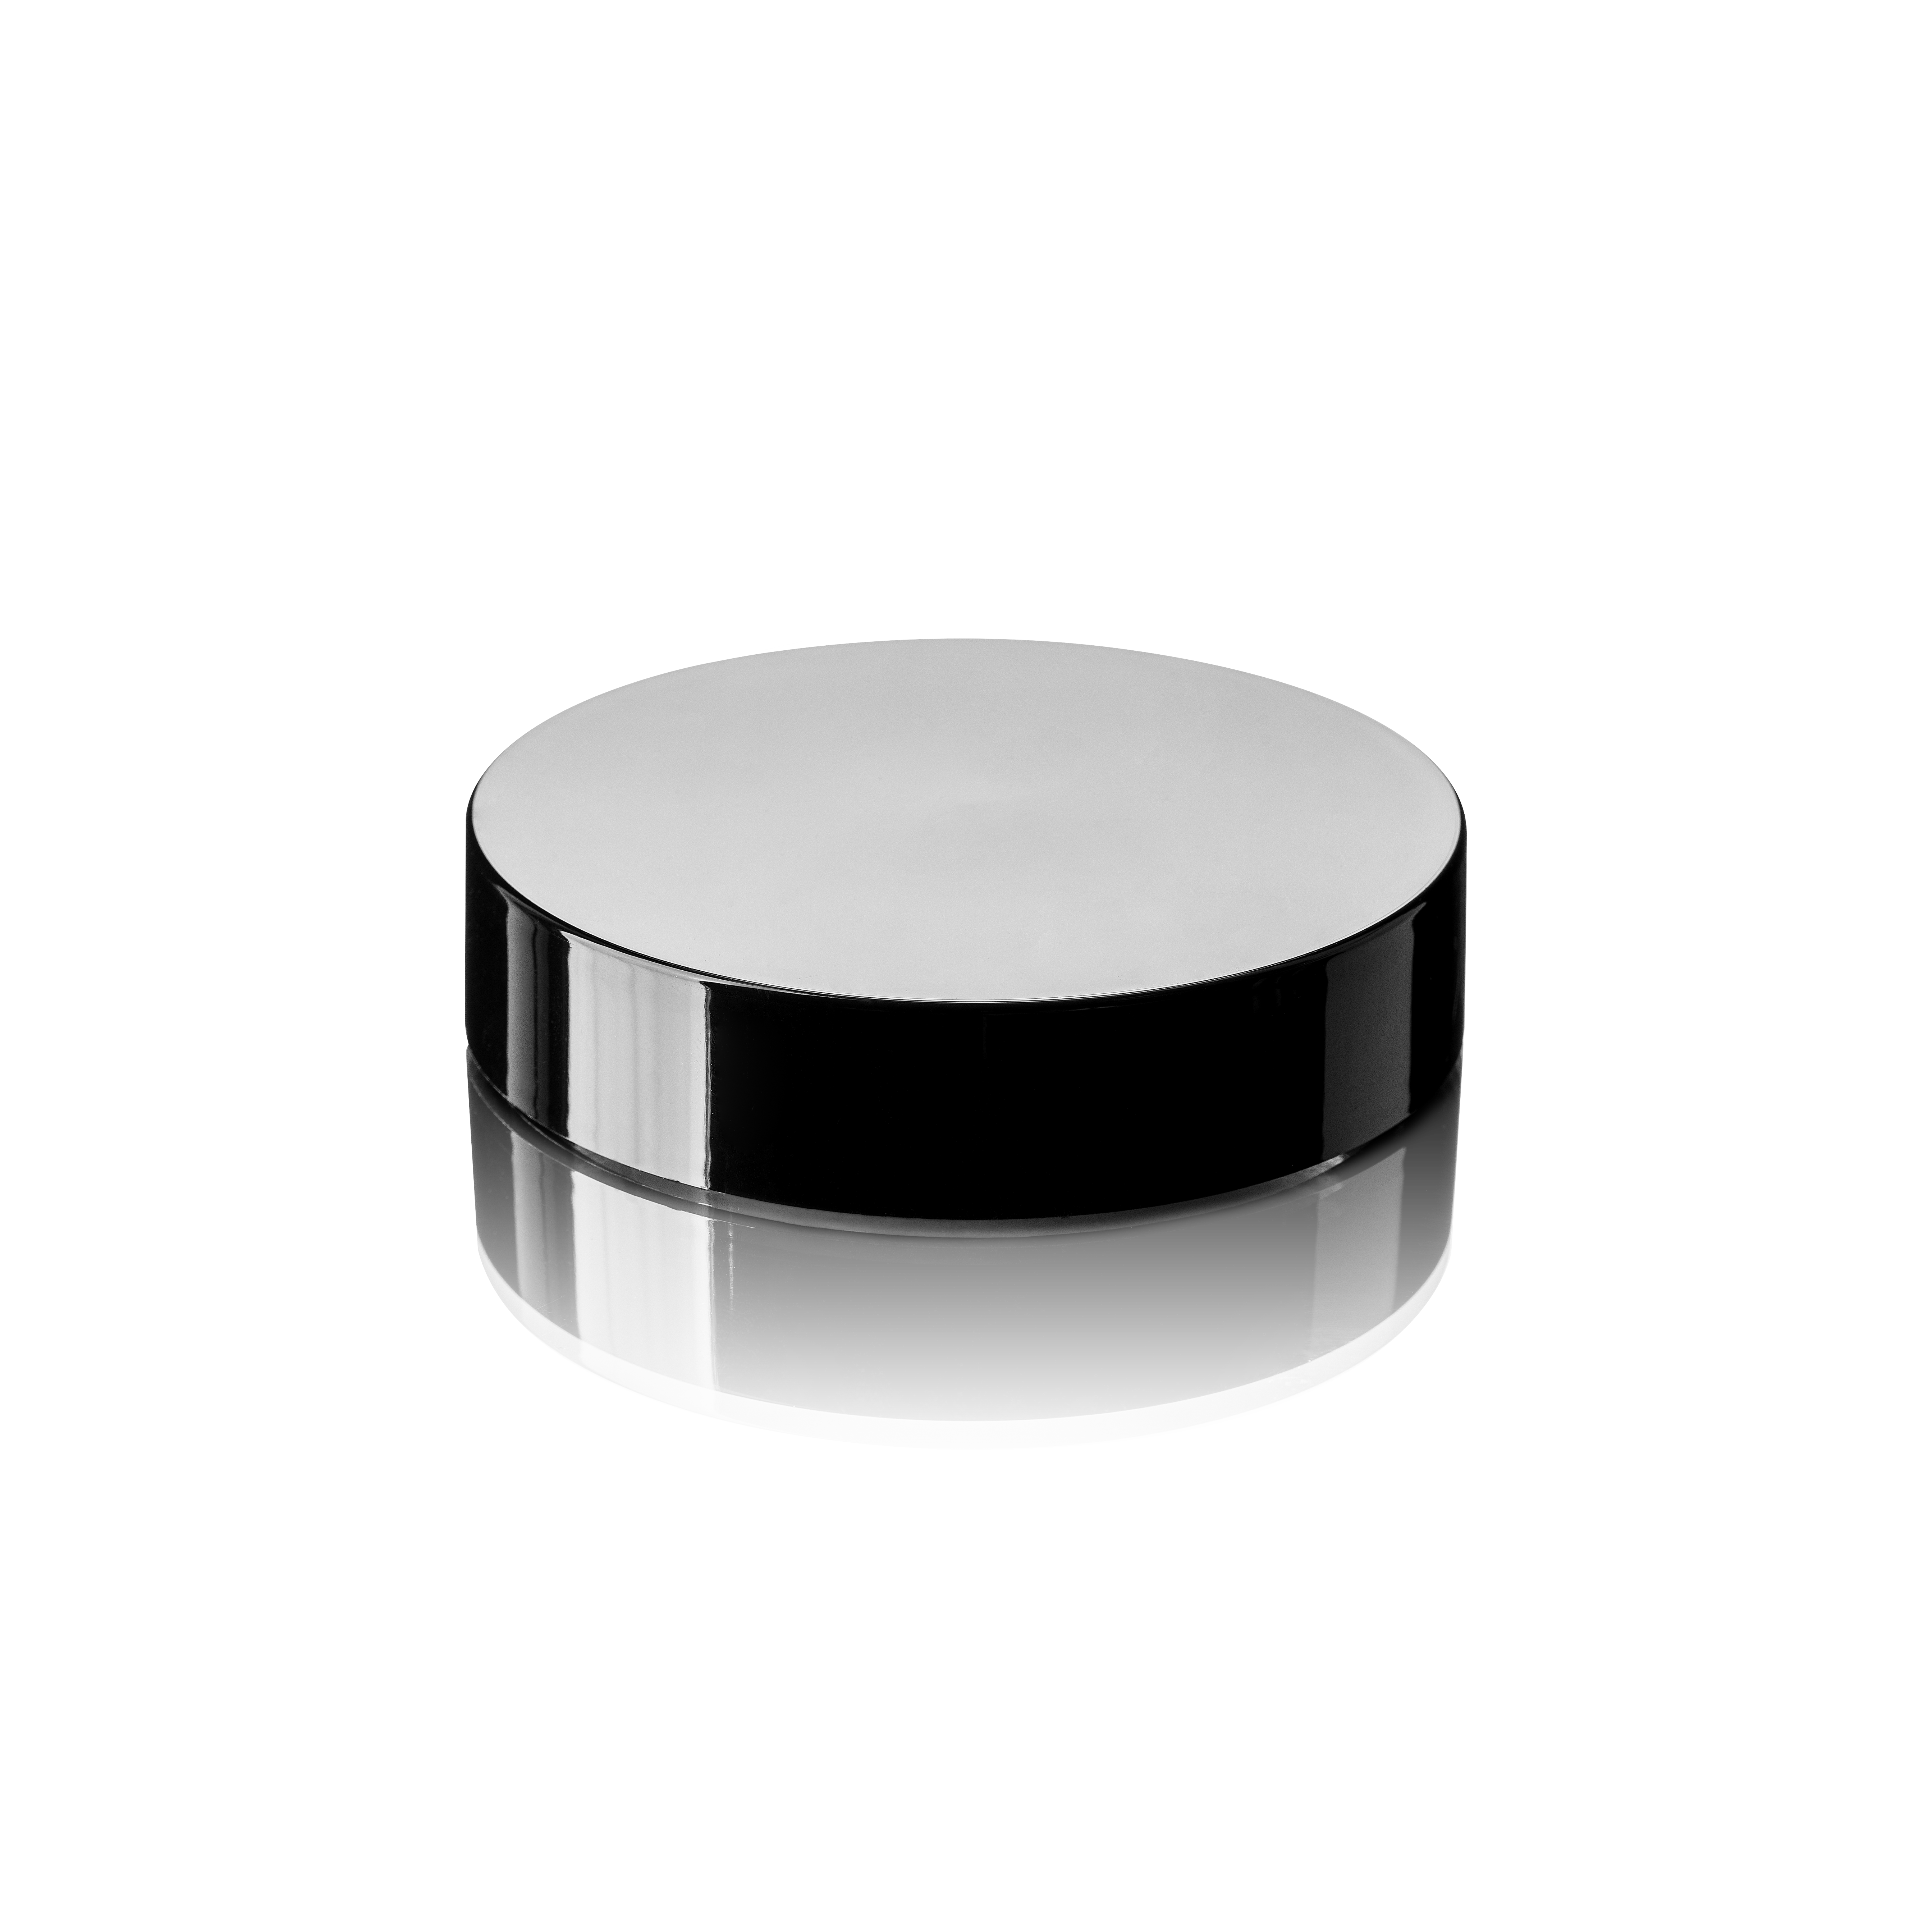 Child-resistant lid Modern 64 mm, PP, black, glossy finish with white Phan inlay for Camellia 120 ml